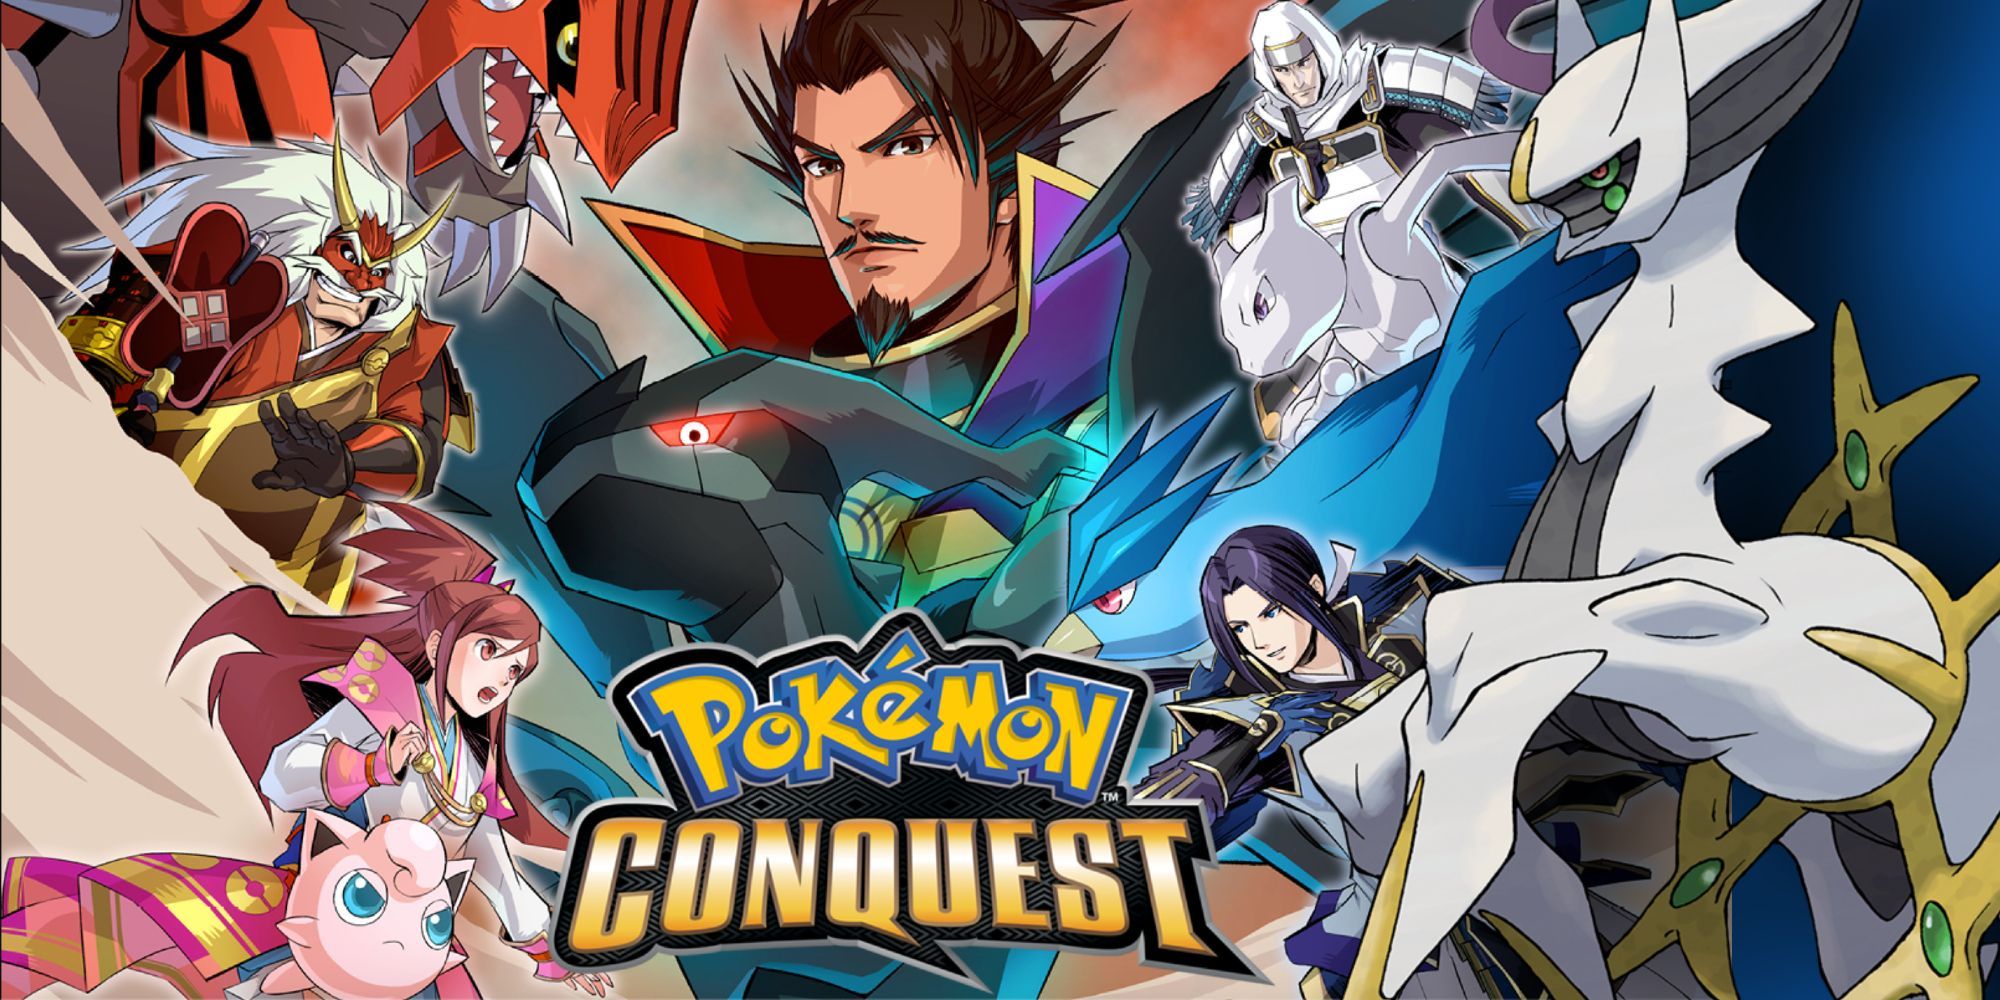 Cover artwork for Pokemon Conquest featuring various warriors posing.